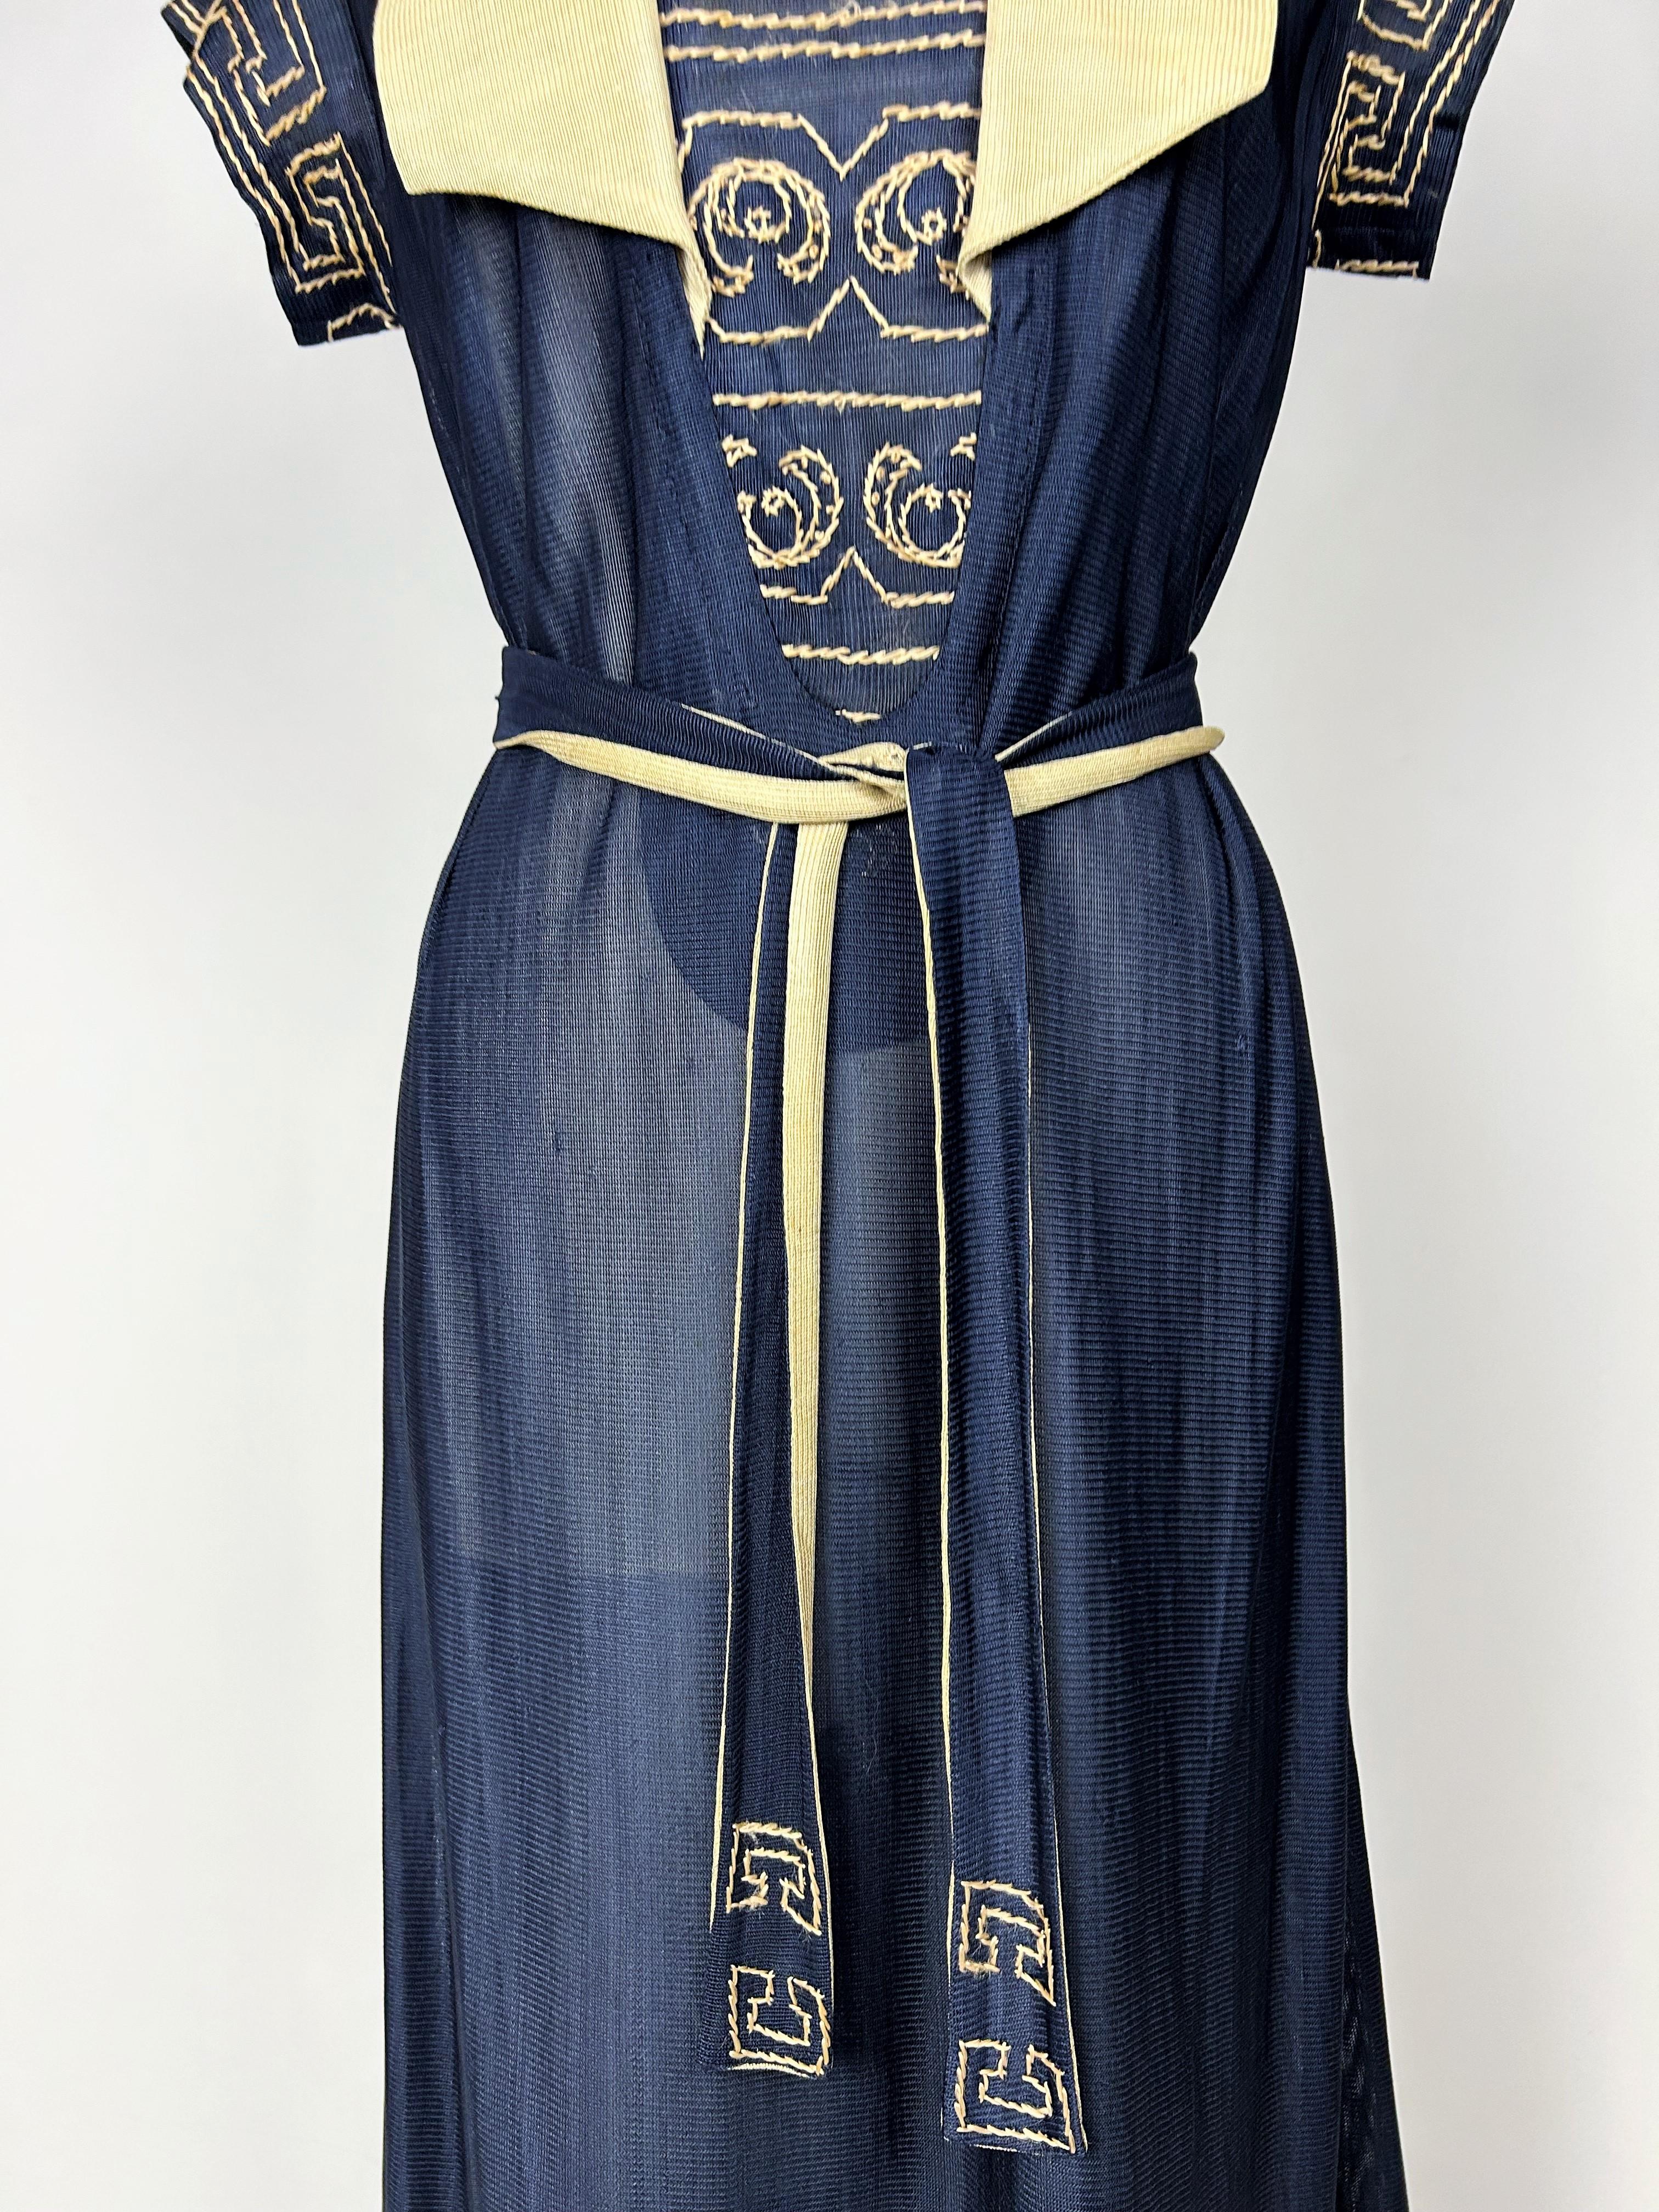 Circa 1918-1922

France

Amazing Marinière dress in two-coloured silk jersey knit with CC embroidery in the style of Coco Chanel who invented in 1917 this type of seaside dress with the Maison Rodier. Definitely haute couture work in the assembly